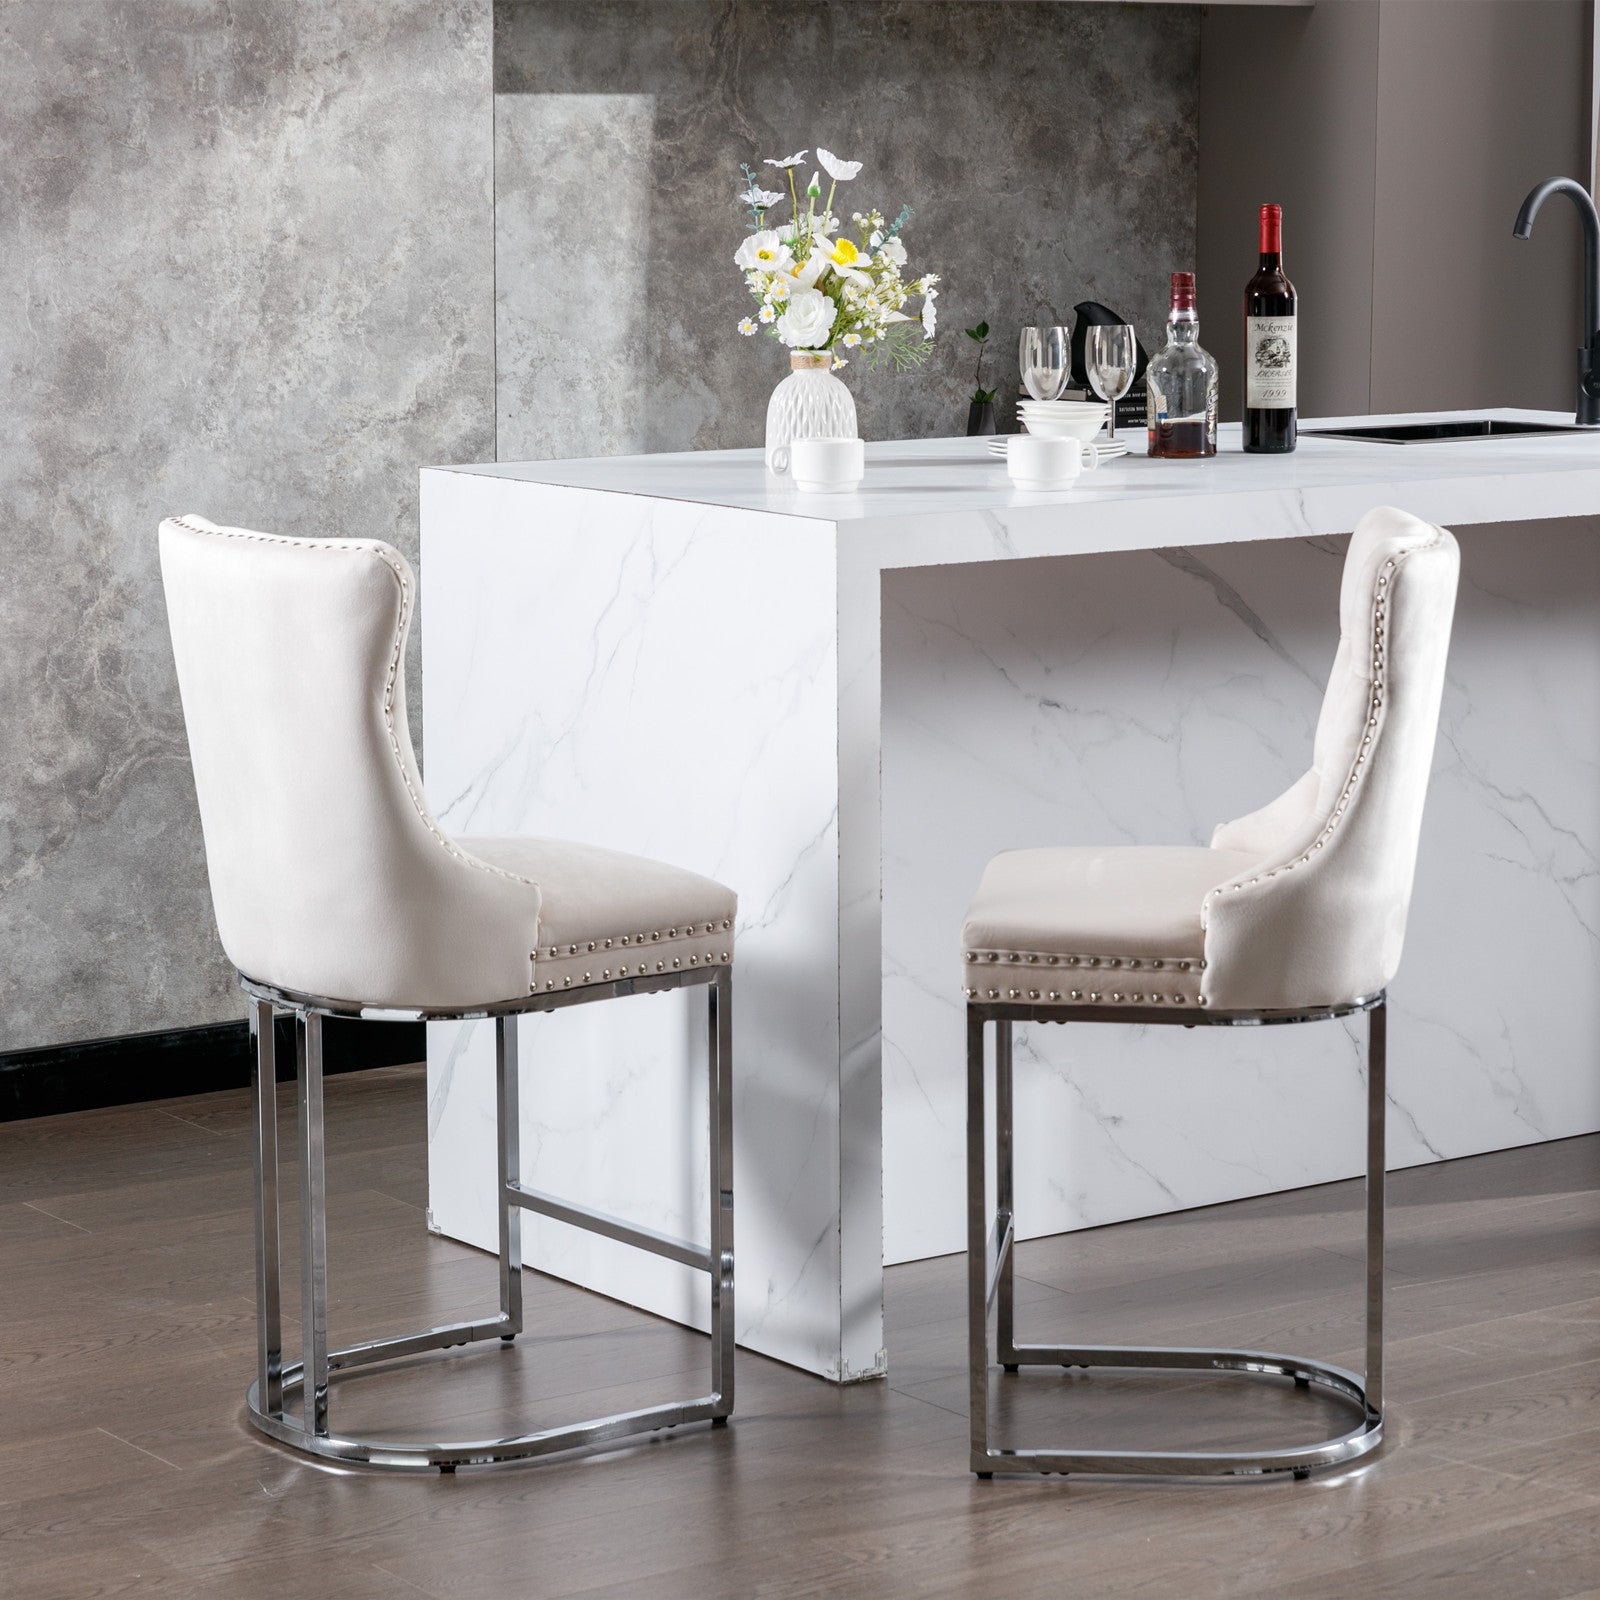 Set of 2 Velvet Modern Counter Stools with Tufted High Back and Chrome Legs